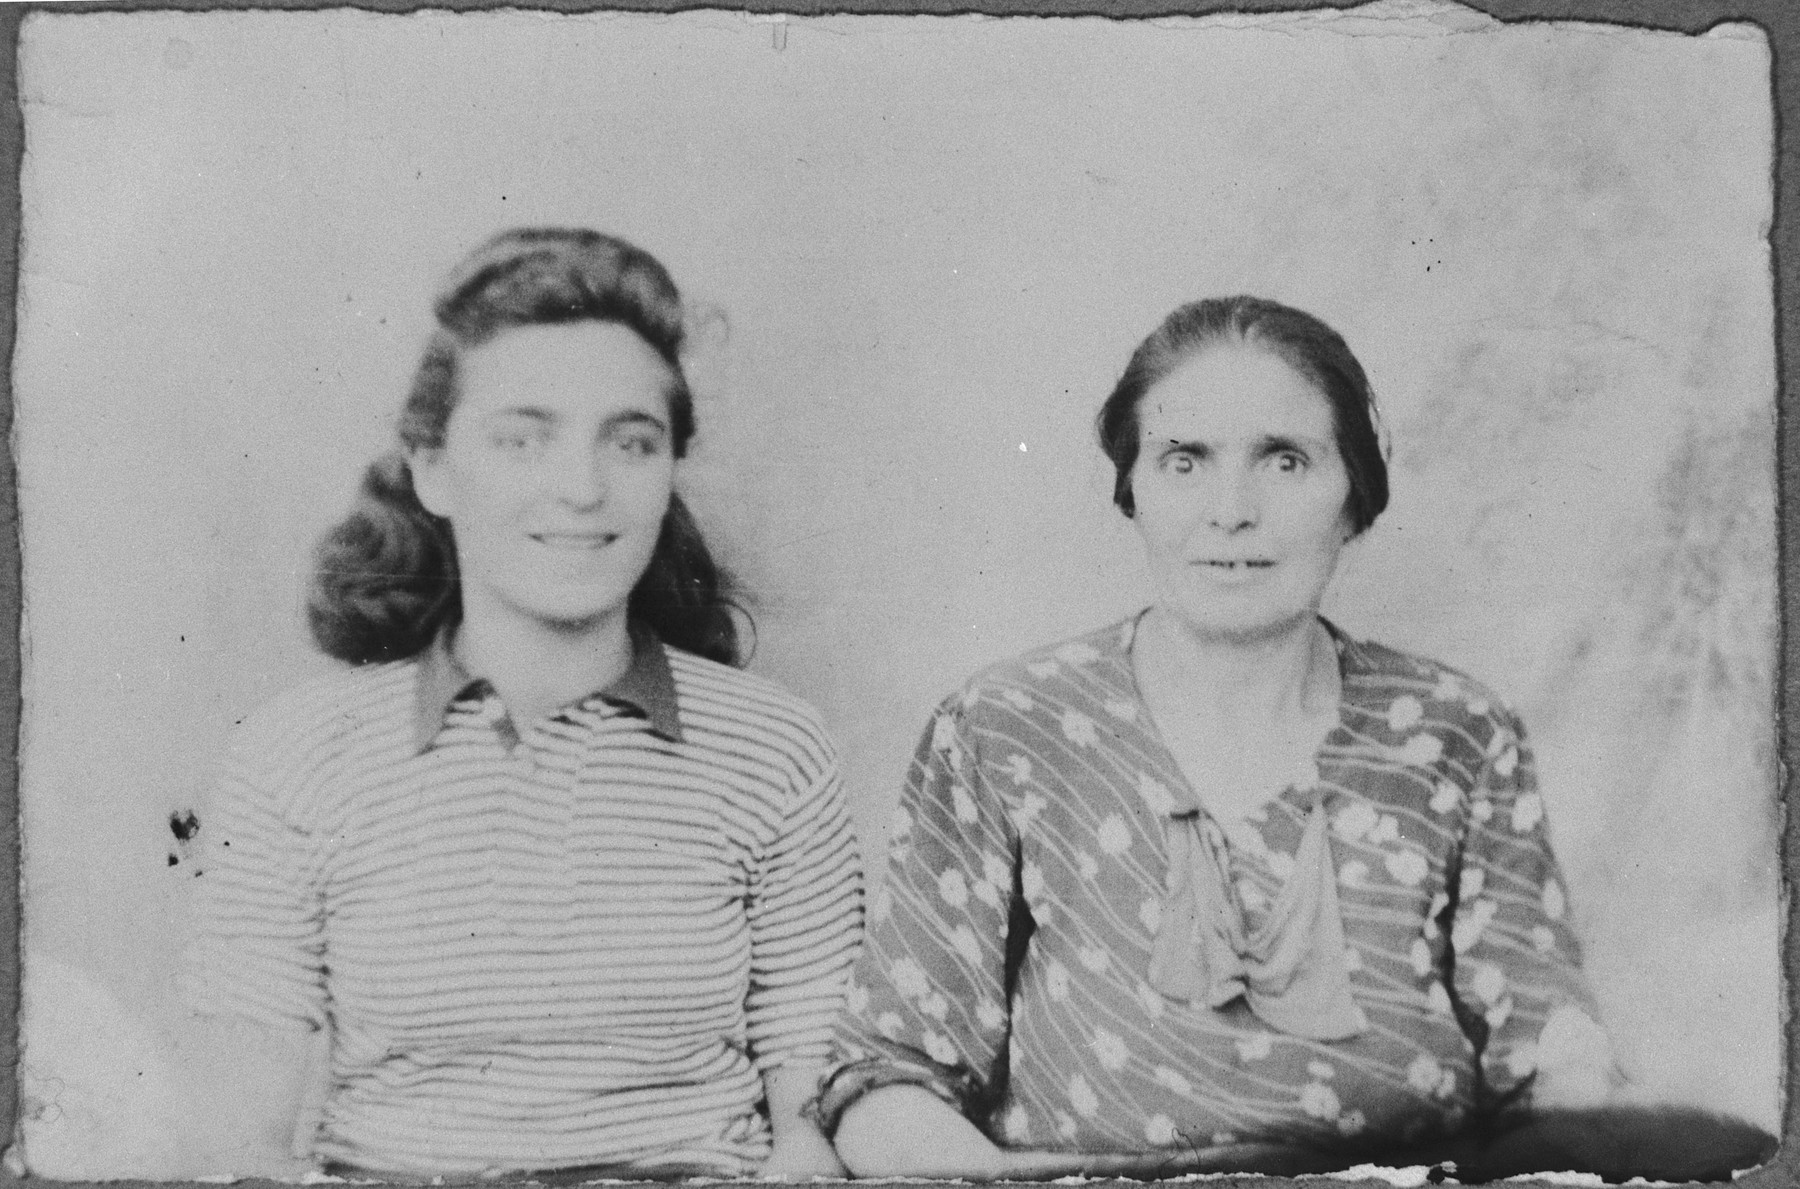 Portrait of Lunar and Ester Alba.  Lunar was a housemaid.  They lived at Sinagogina 12 in Bitola.